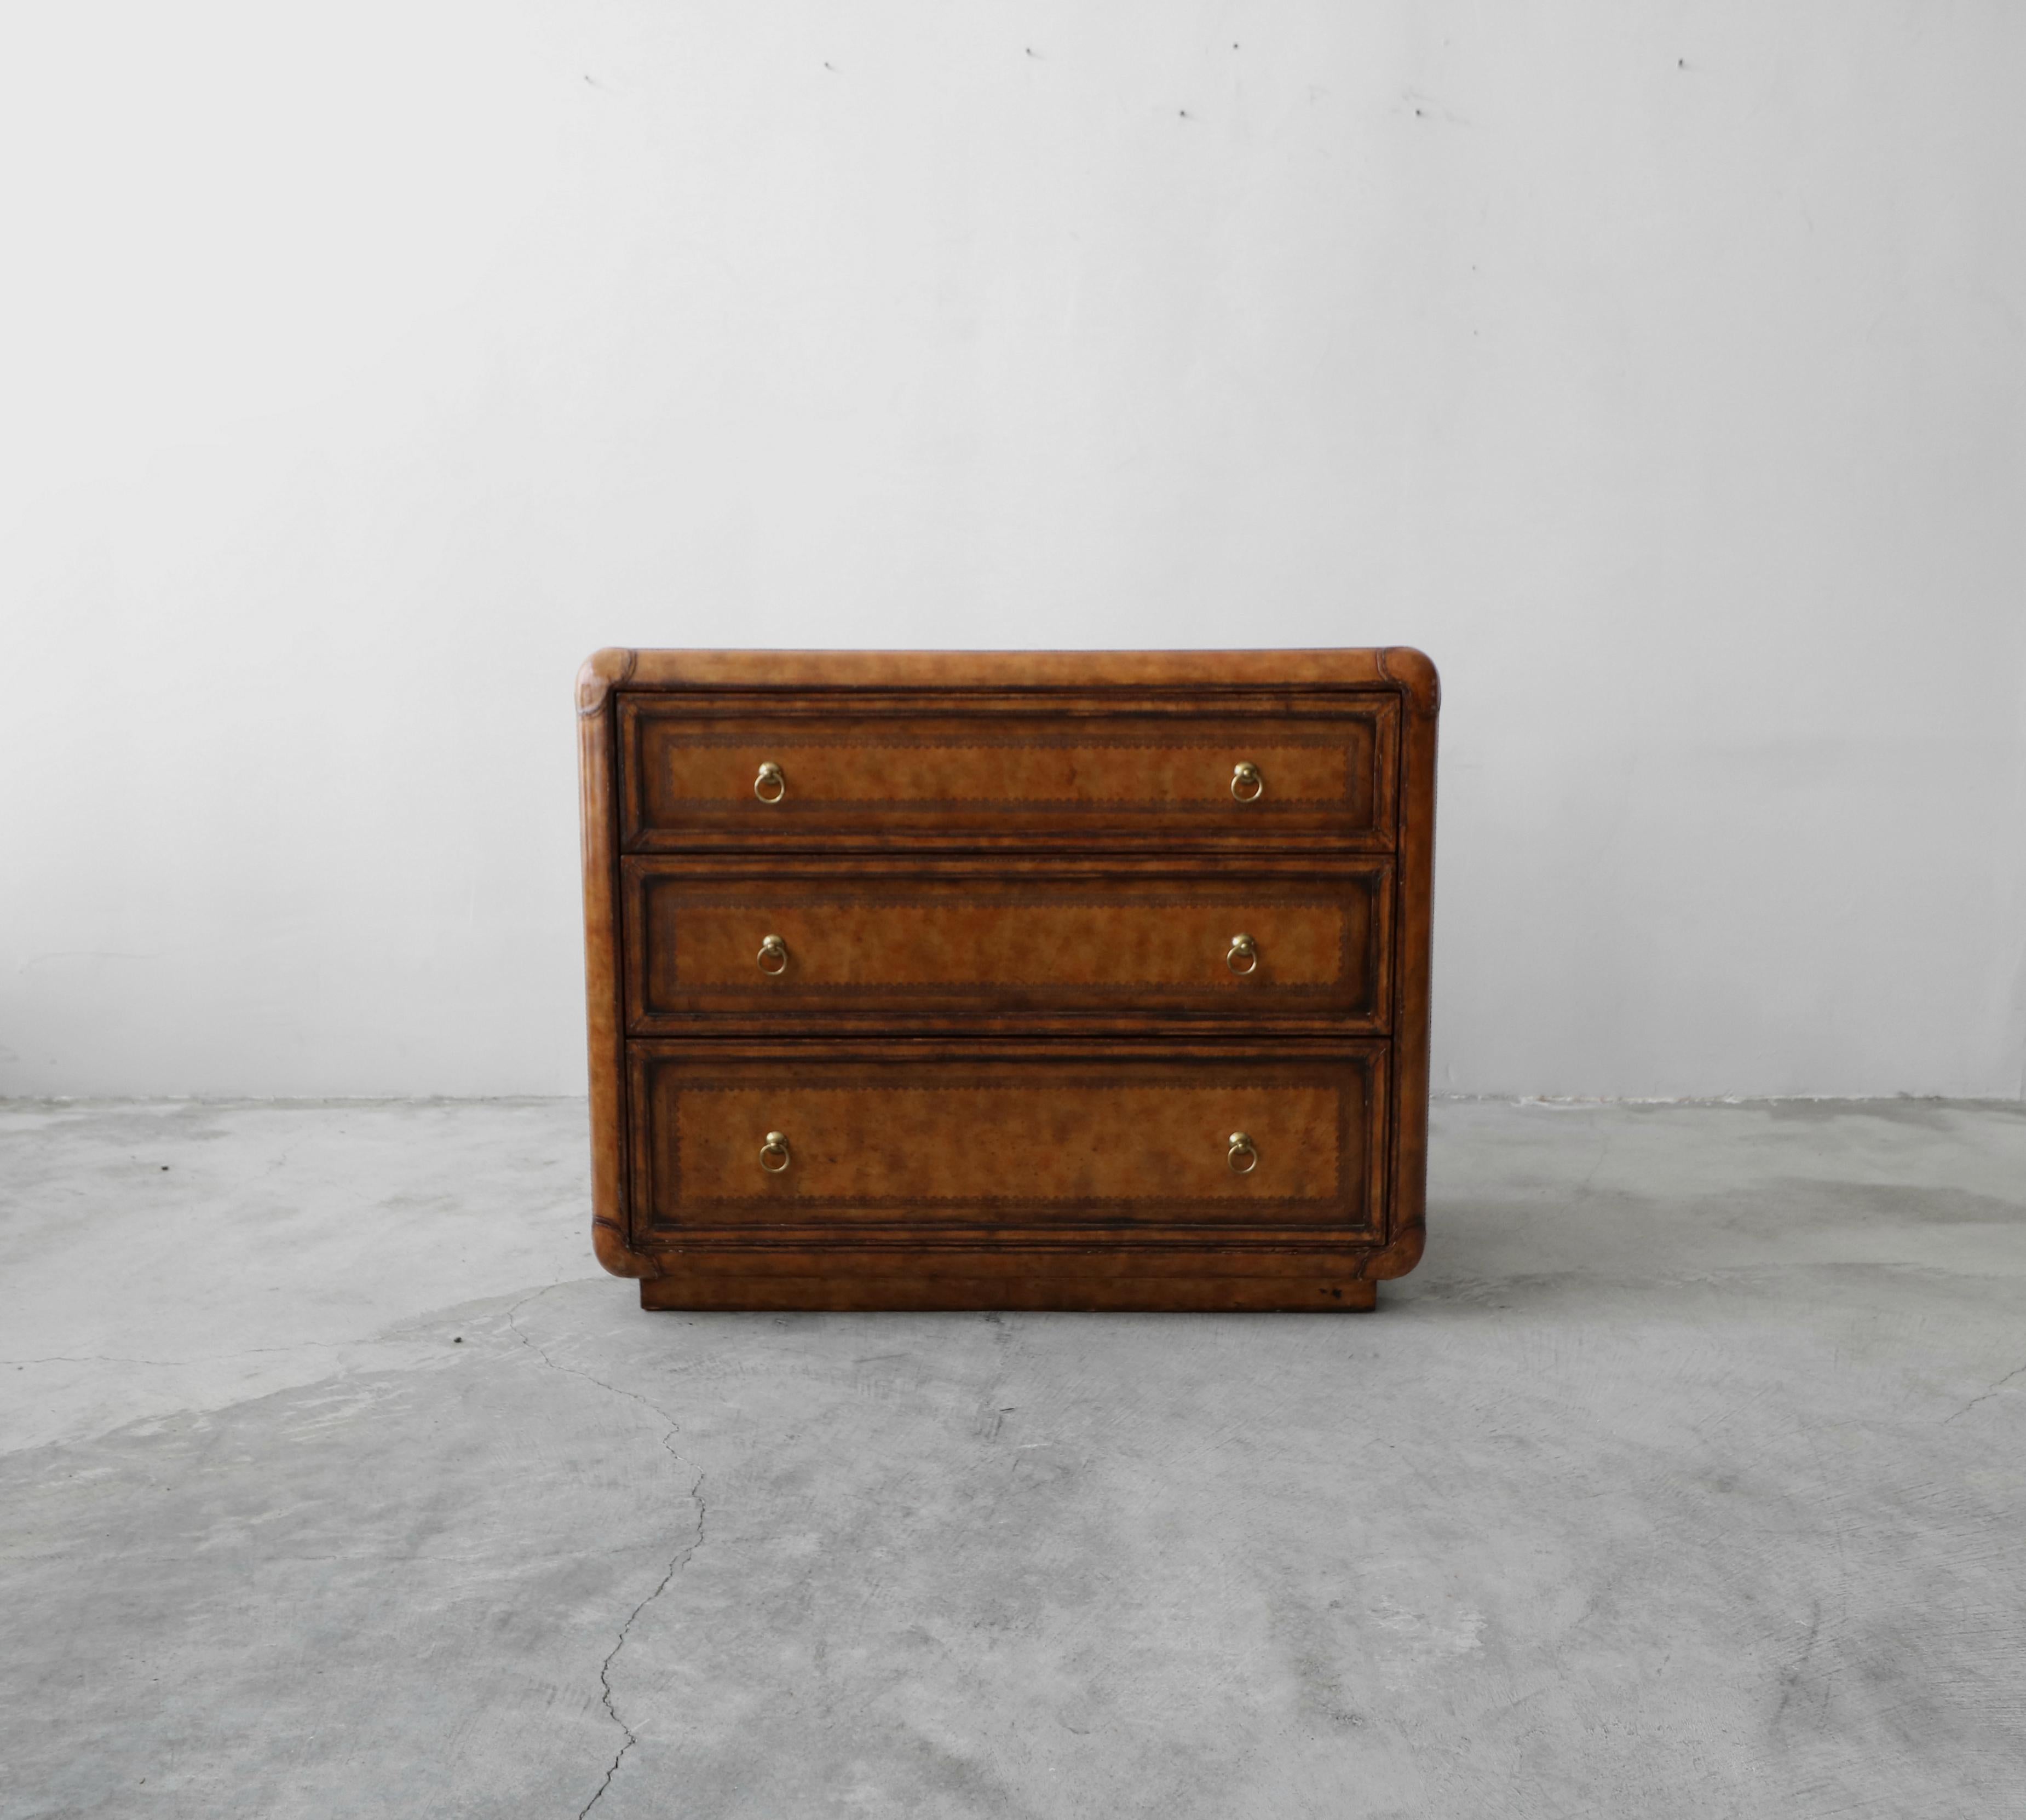 This gorgeous, leather covered chest is an exemplary example of Classic Maitland-Smith craftsmanship. Would make the perfect entry chest or men's dresser.

Chest is covered in beautifully patinated leather, with hand tooled details and brass